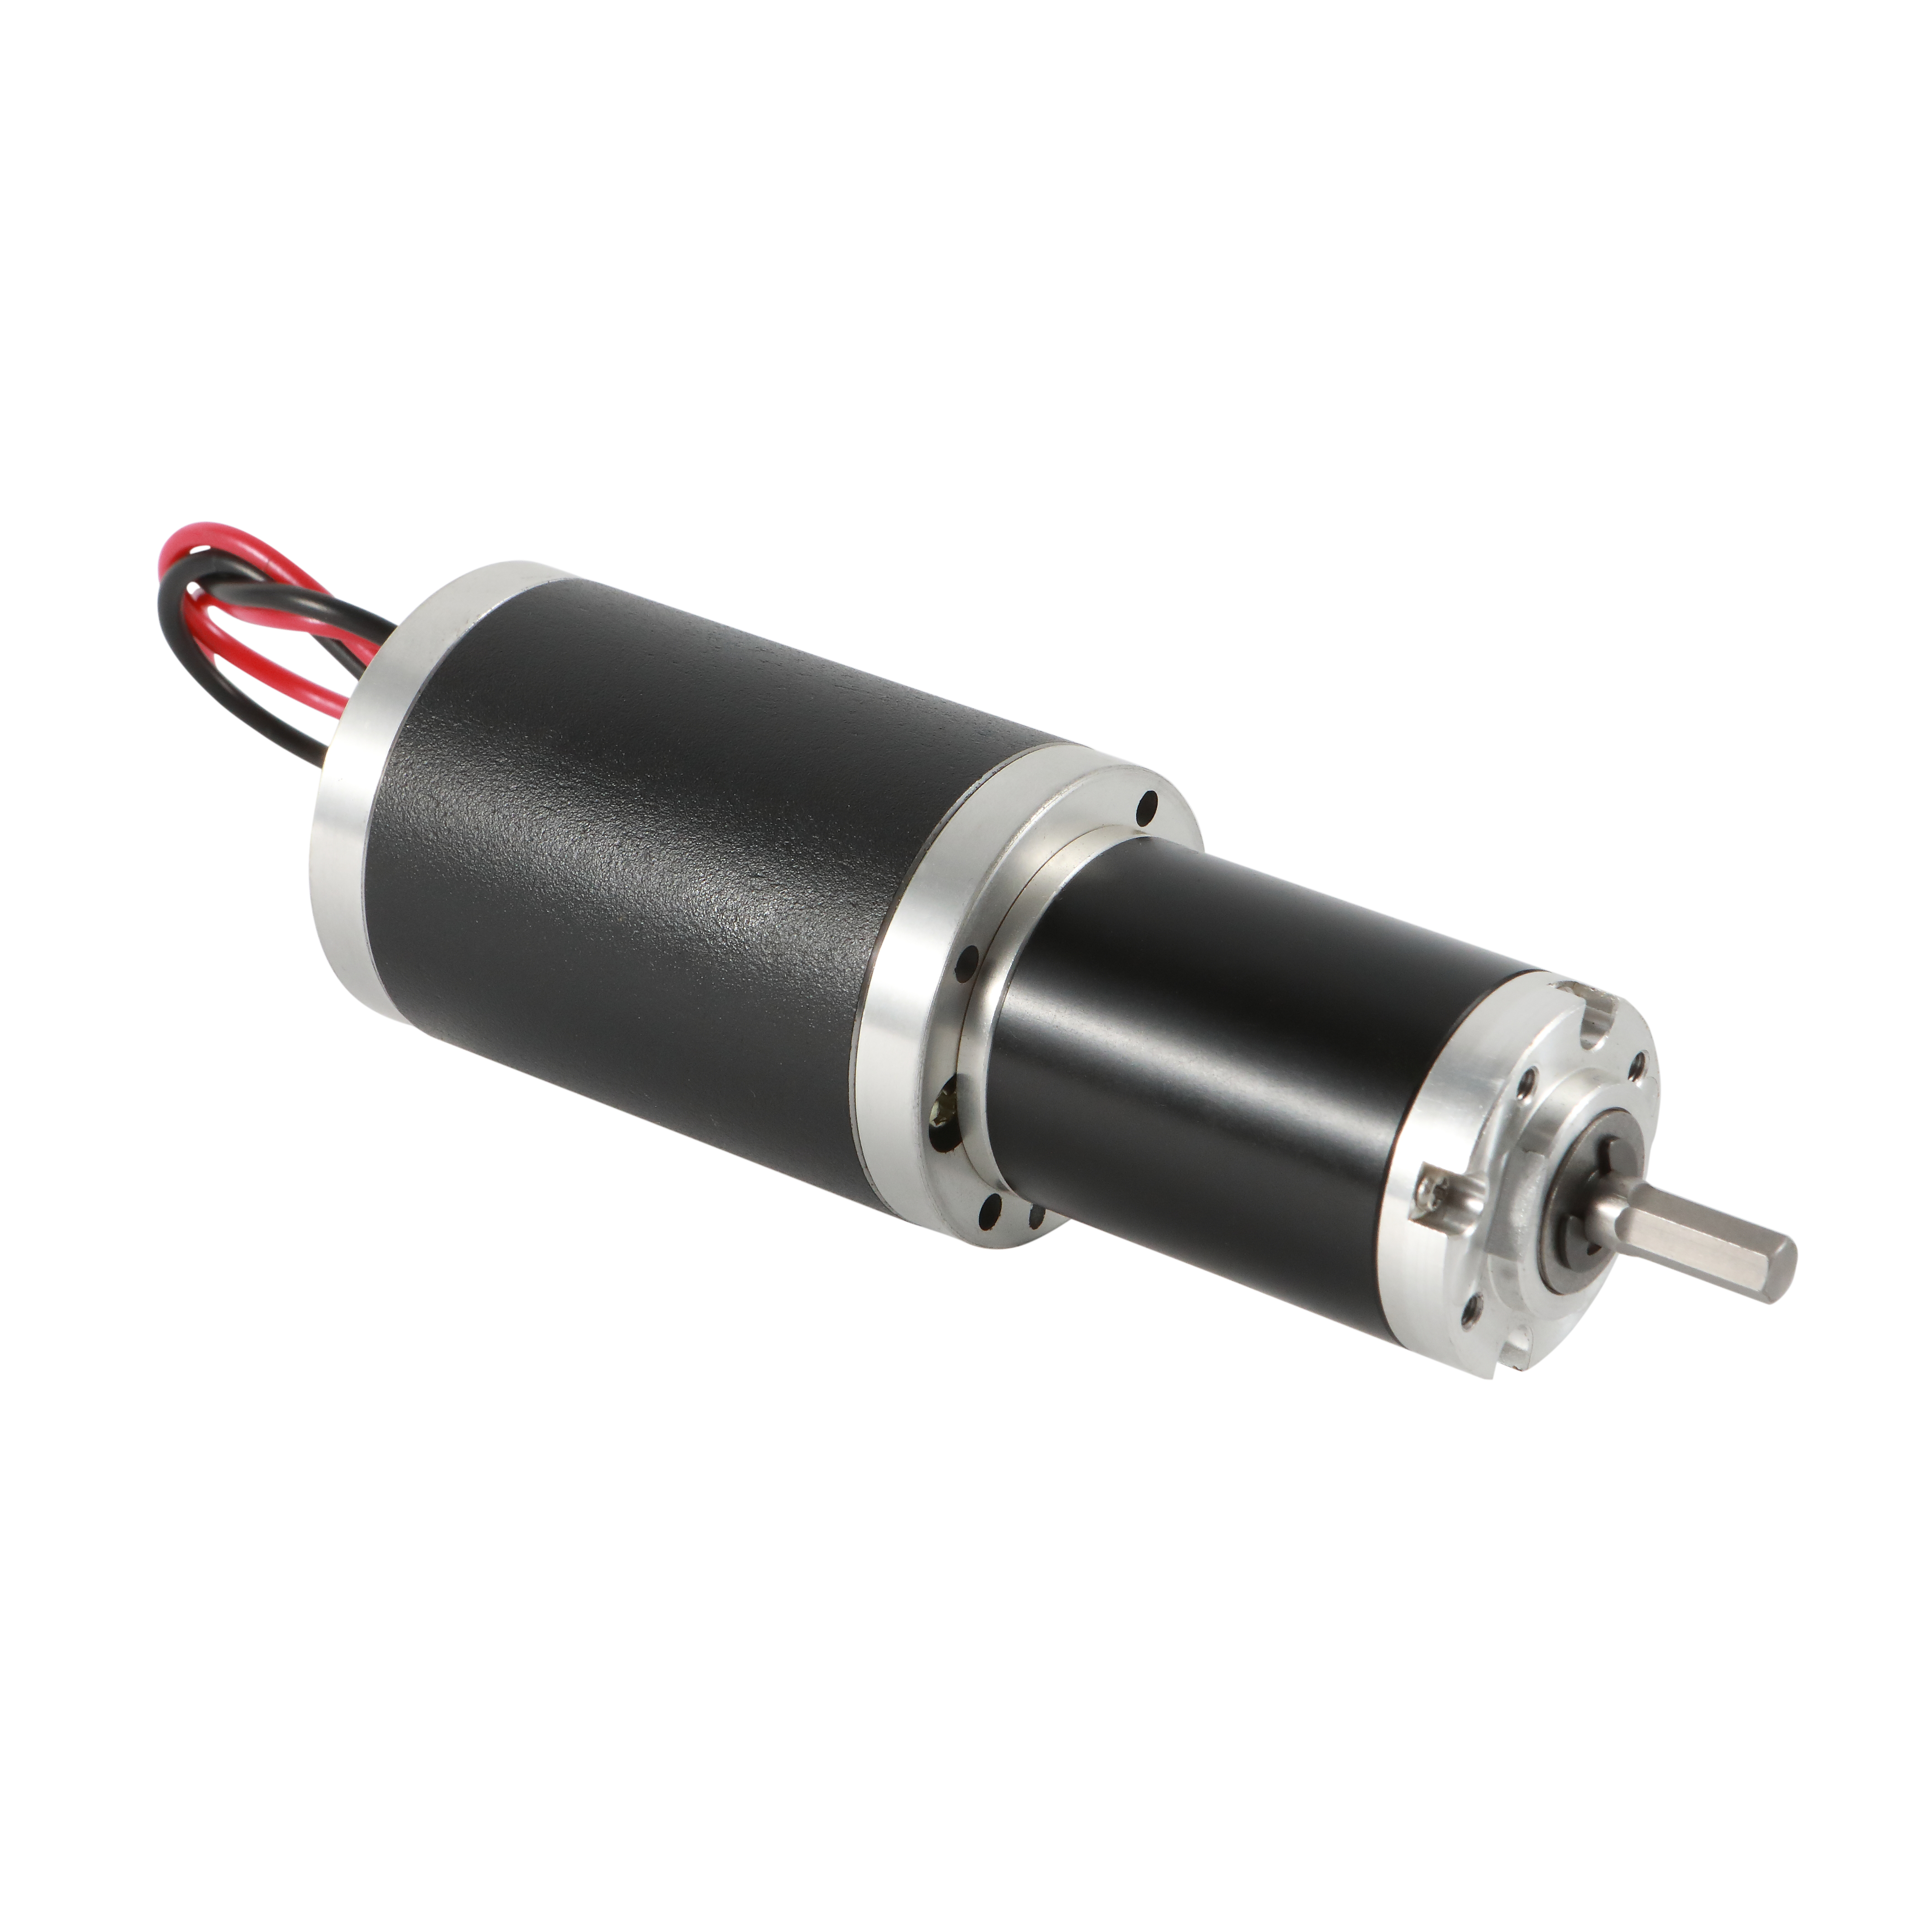 Automatic Awning Electric Planet Geared Motor